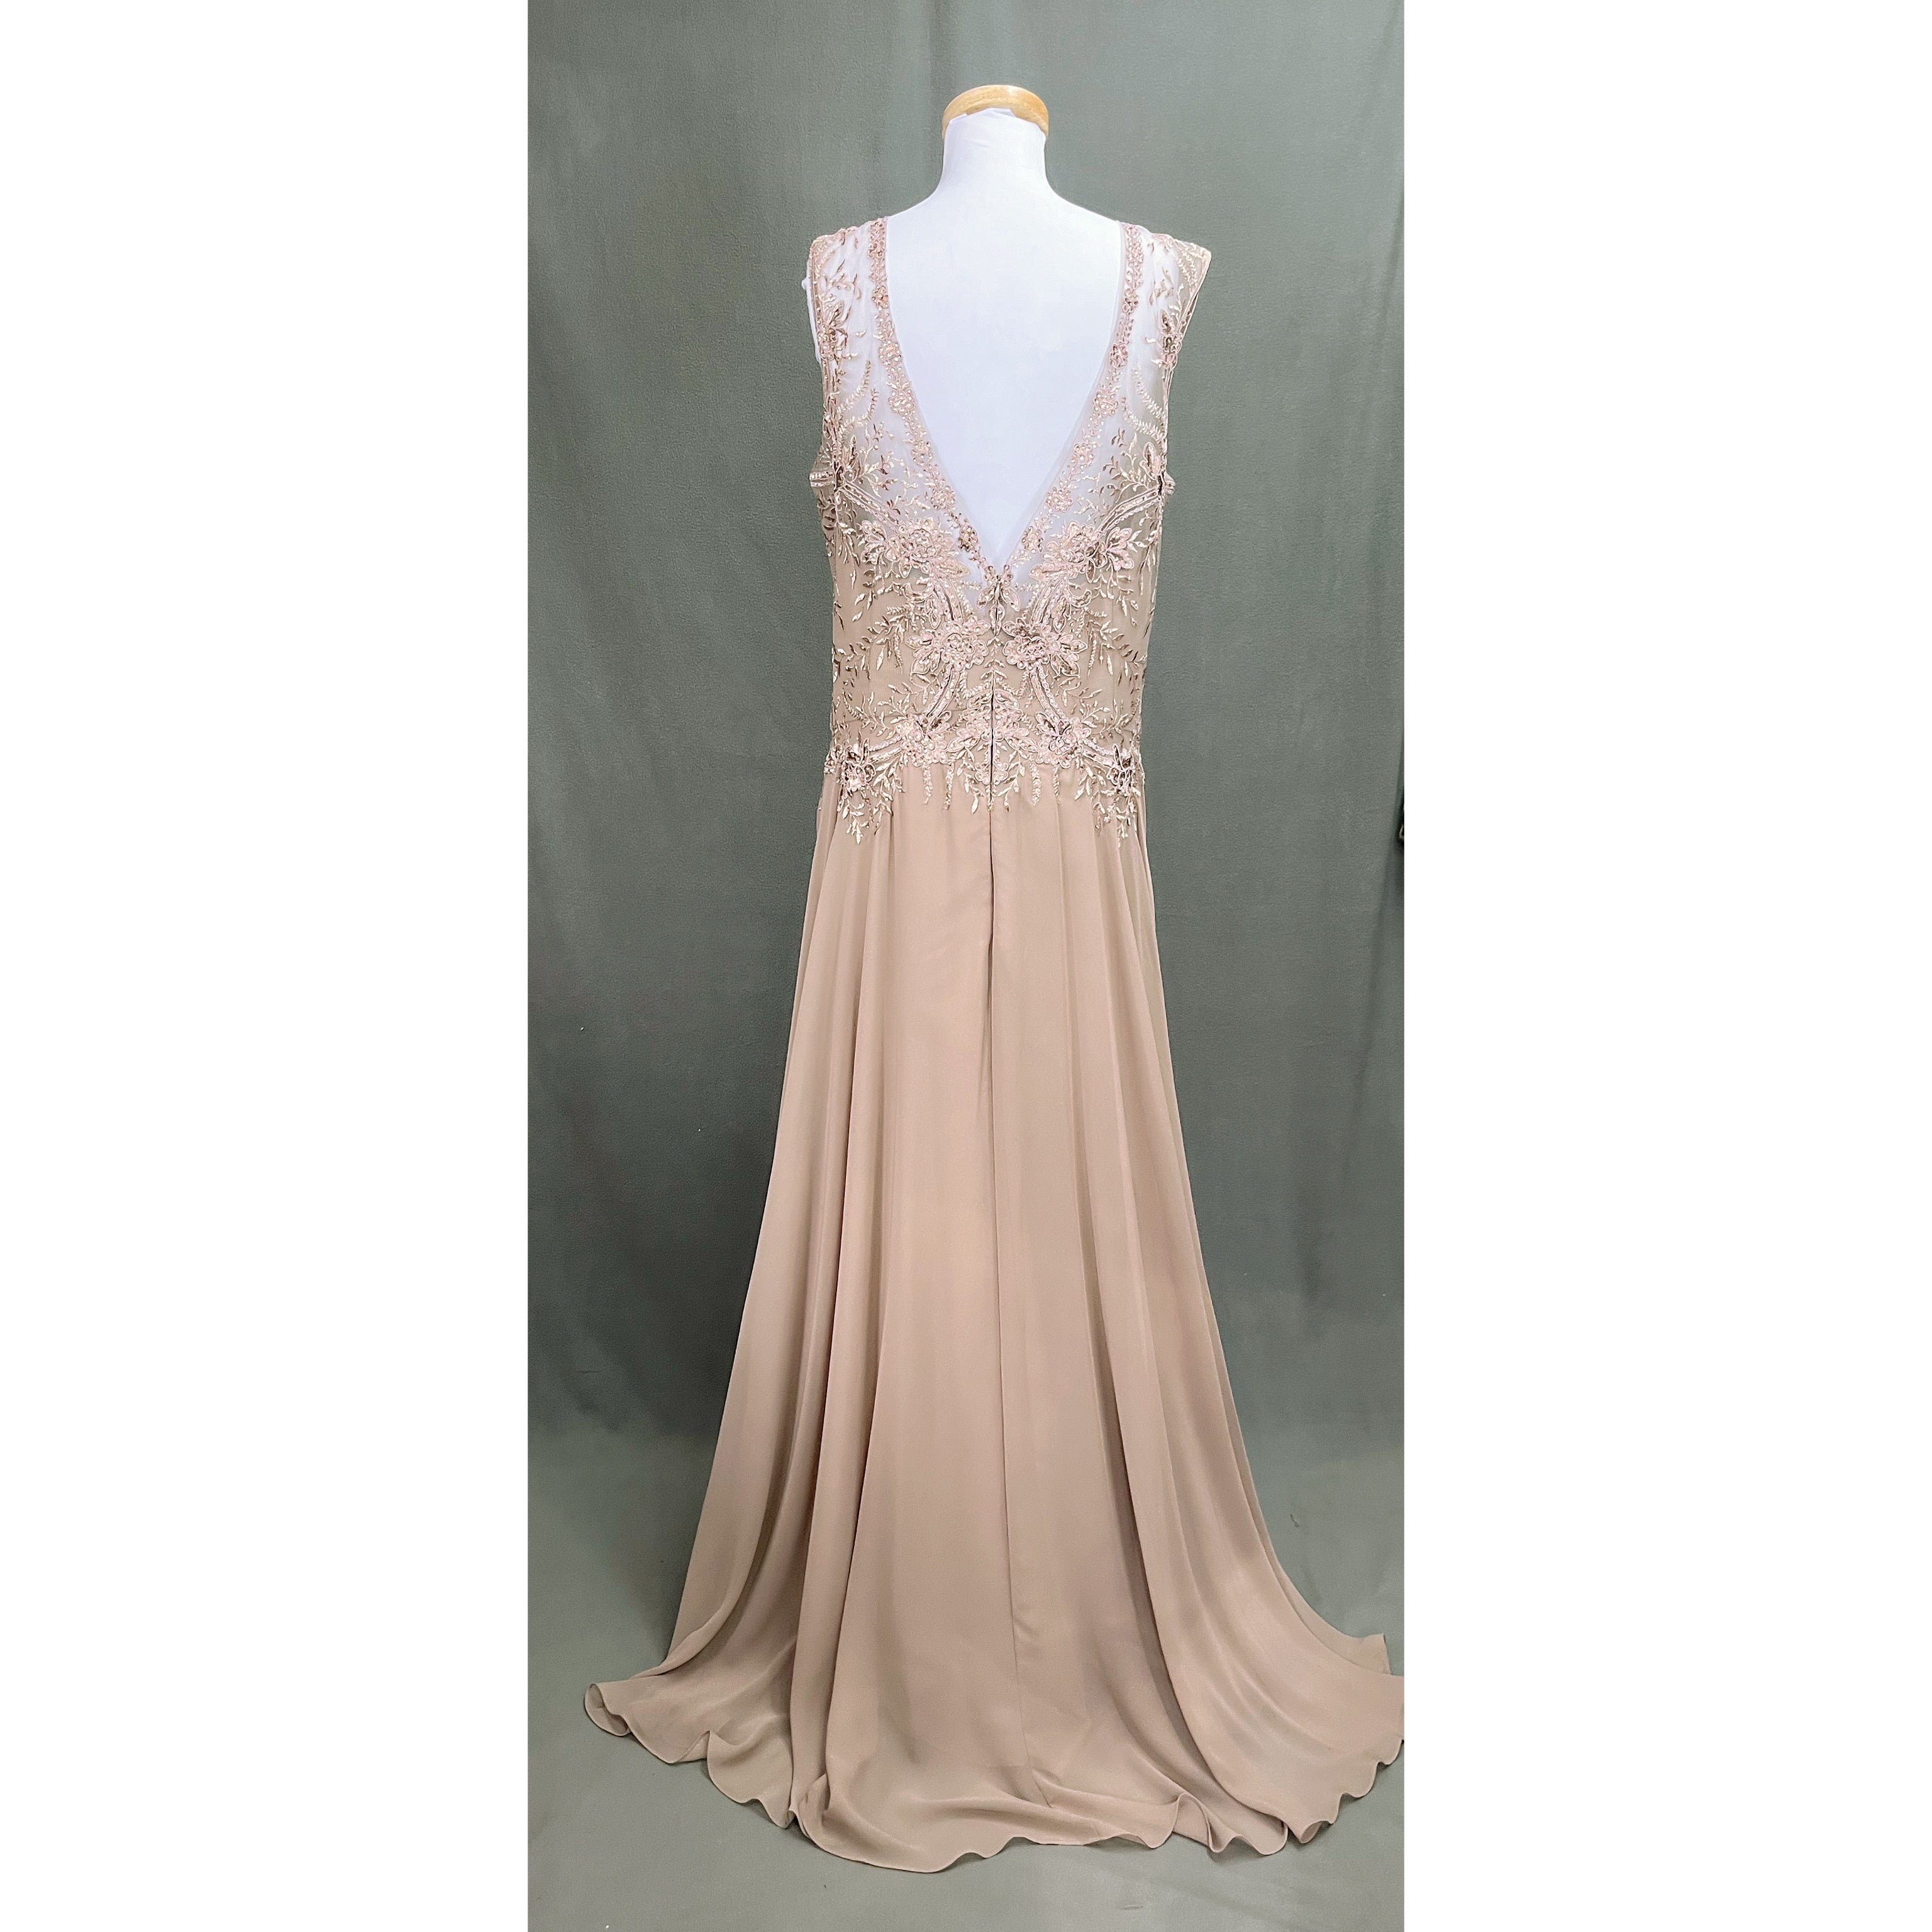 MGNY champagne dress, size 18, NEW WITH TAGS!